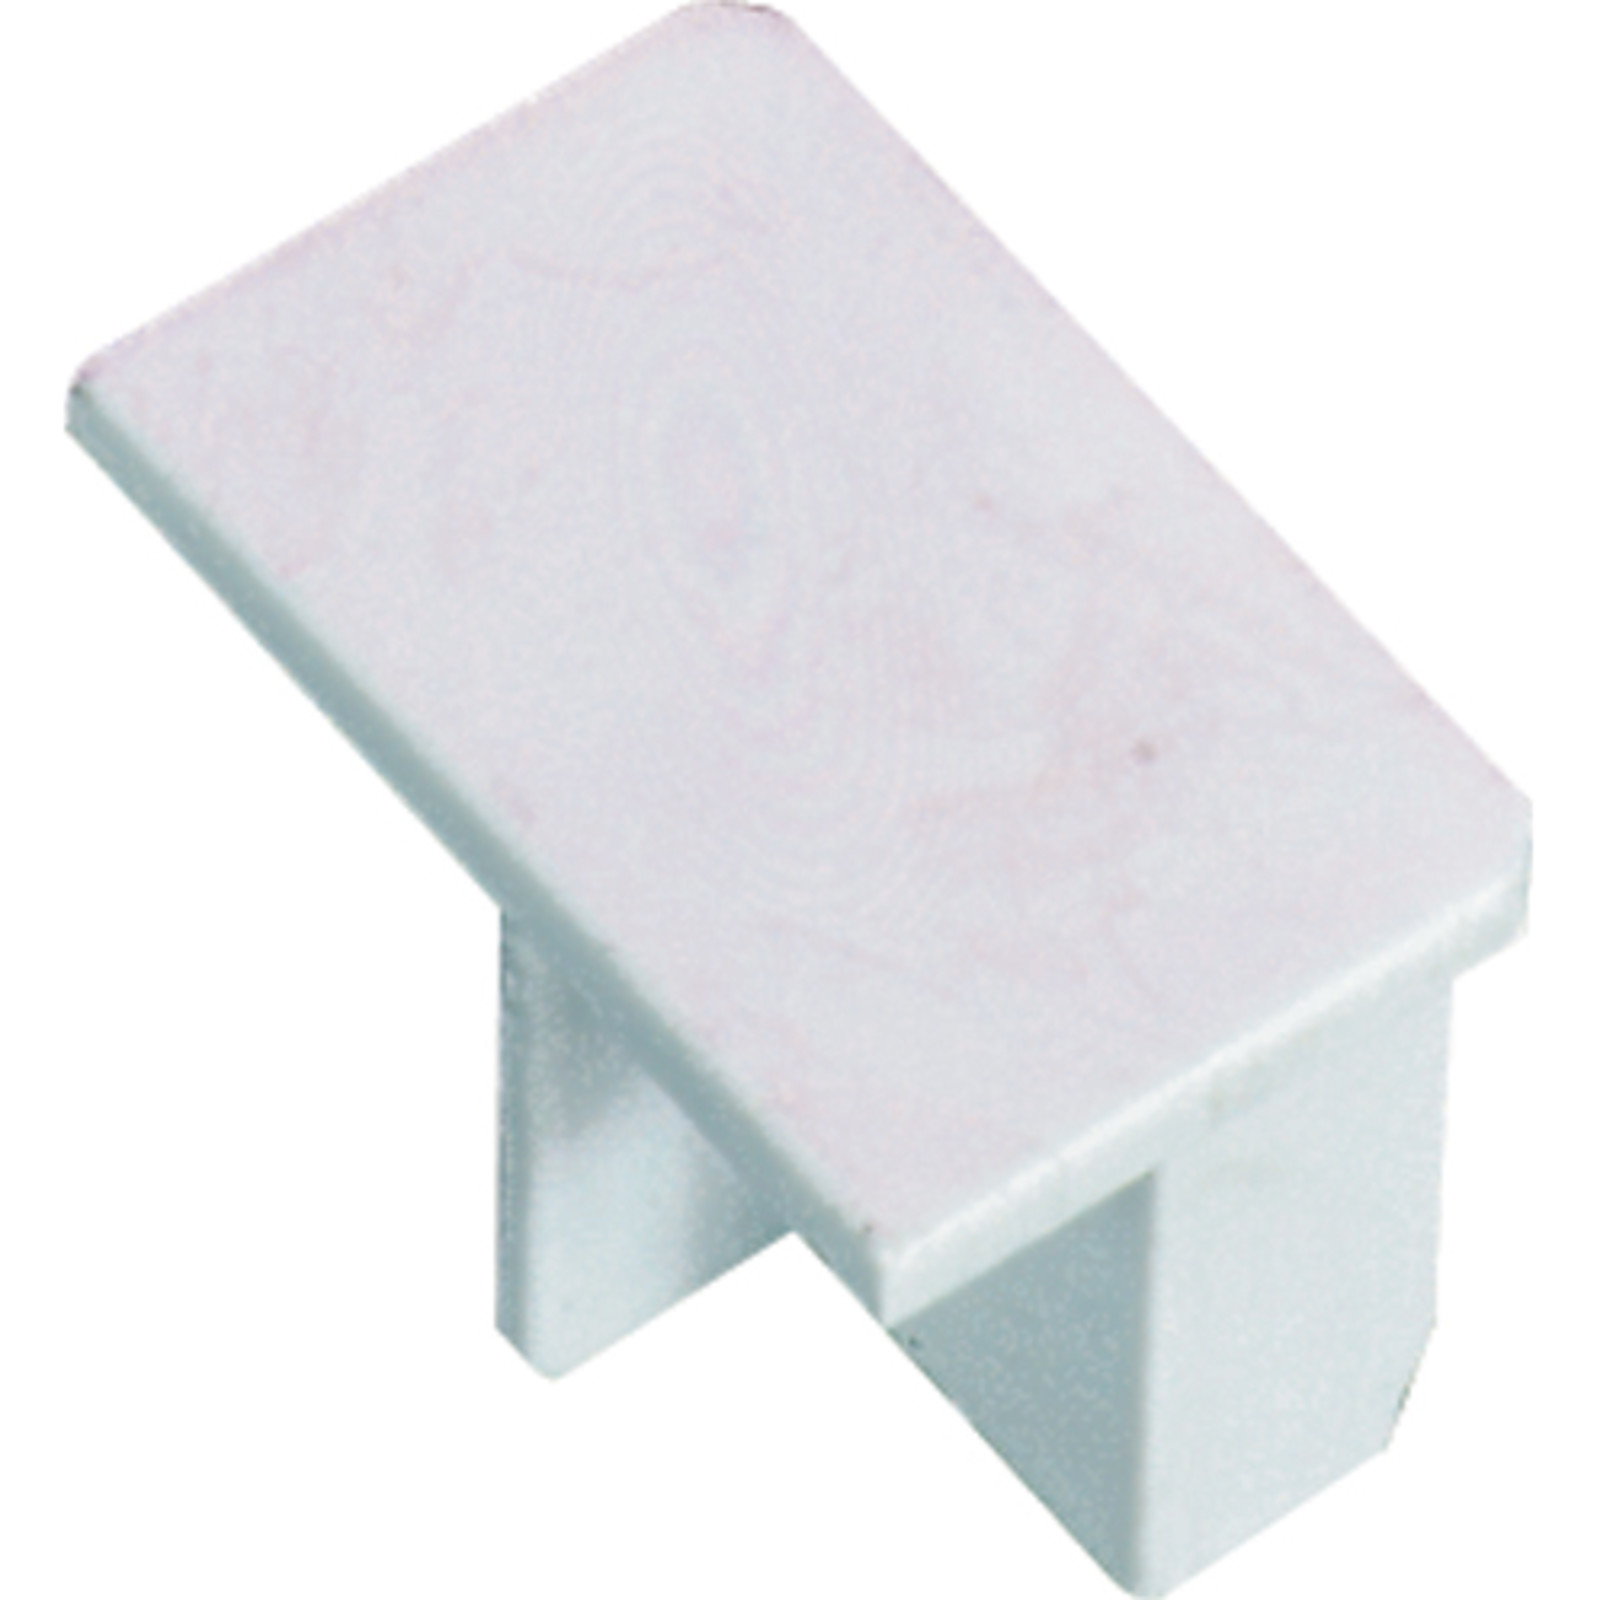 Maxi Trunking Fittings 50 x 50mm End Caps